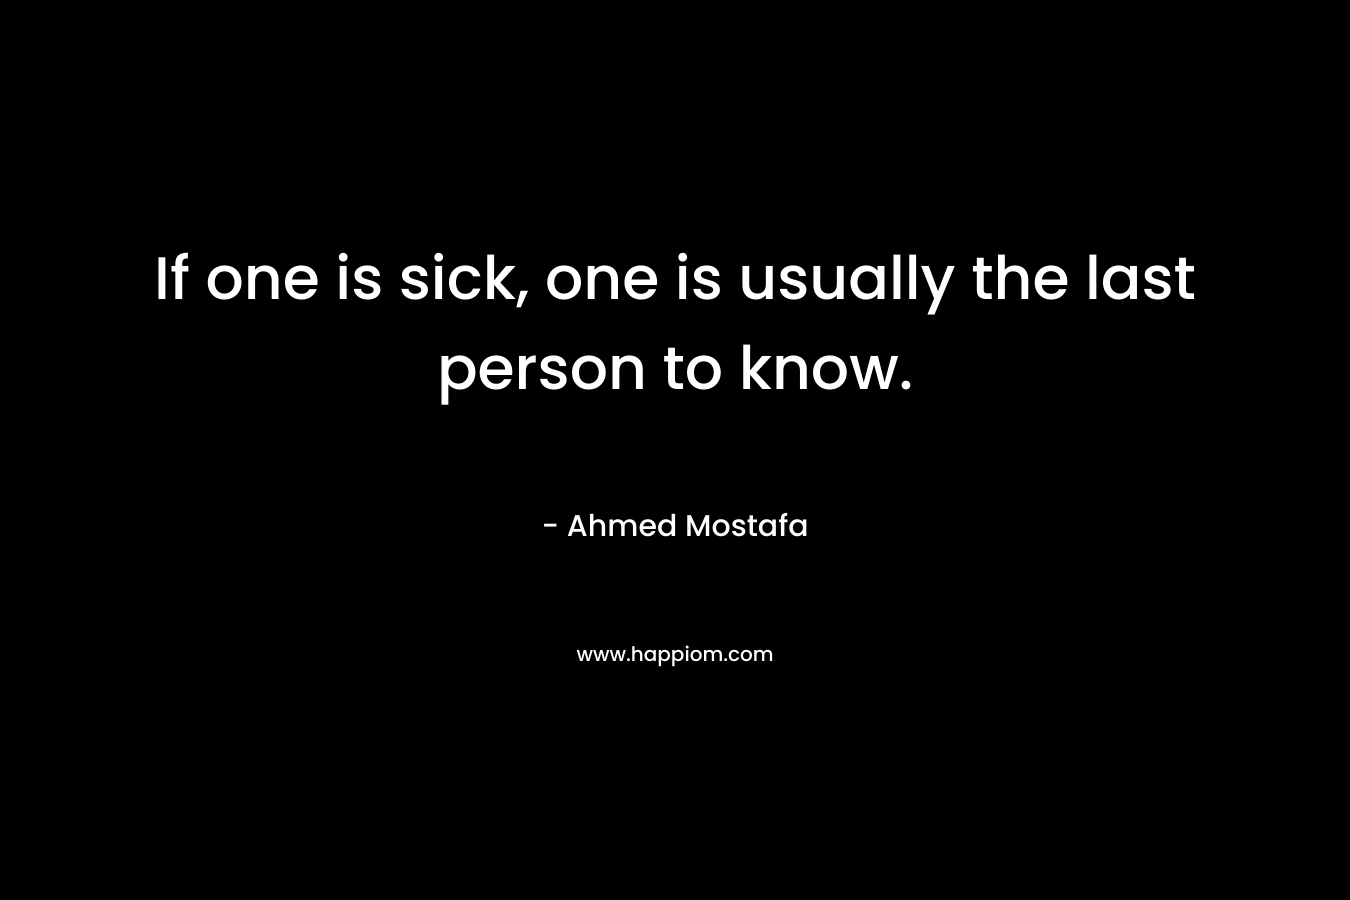 If one is sick, one is usually the last person to know. – Ahmed Mostafa